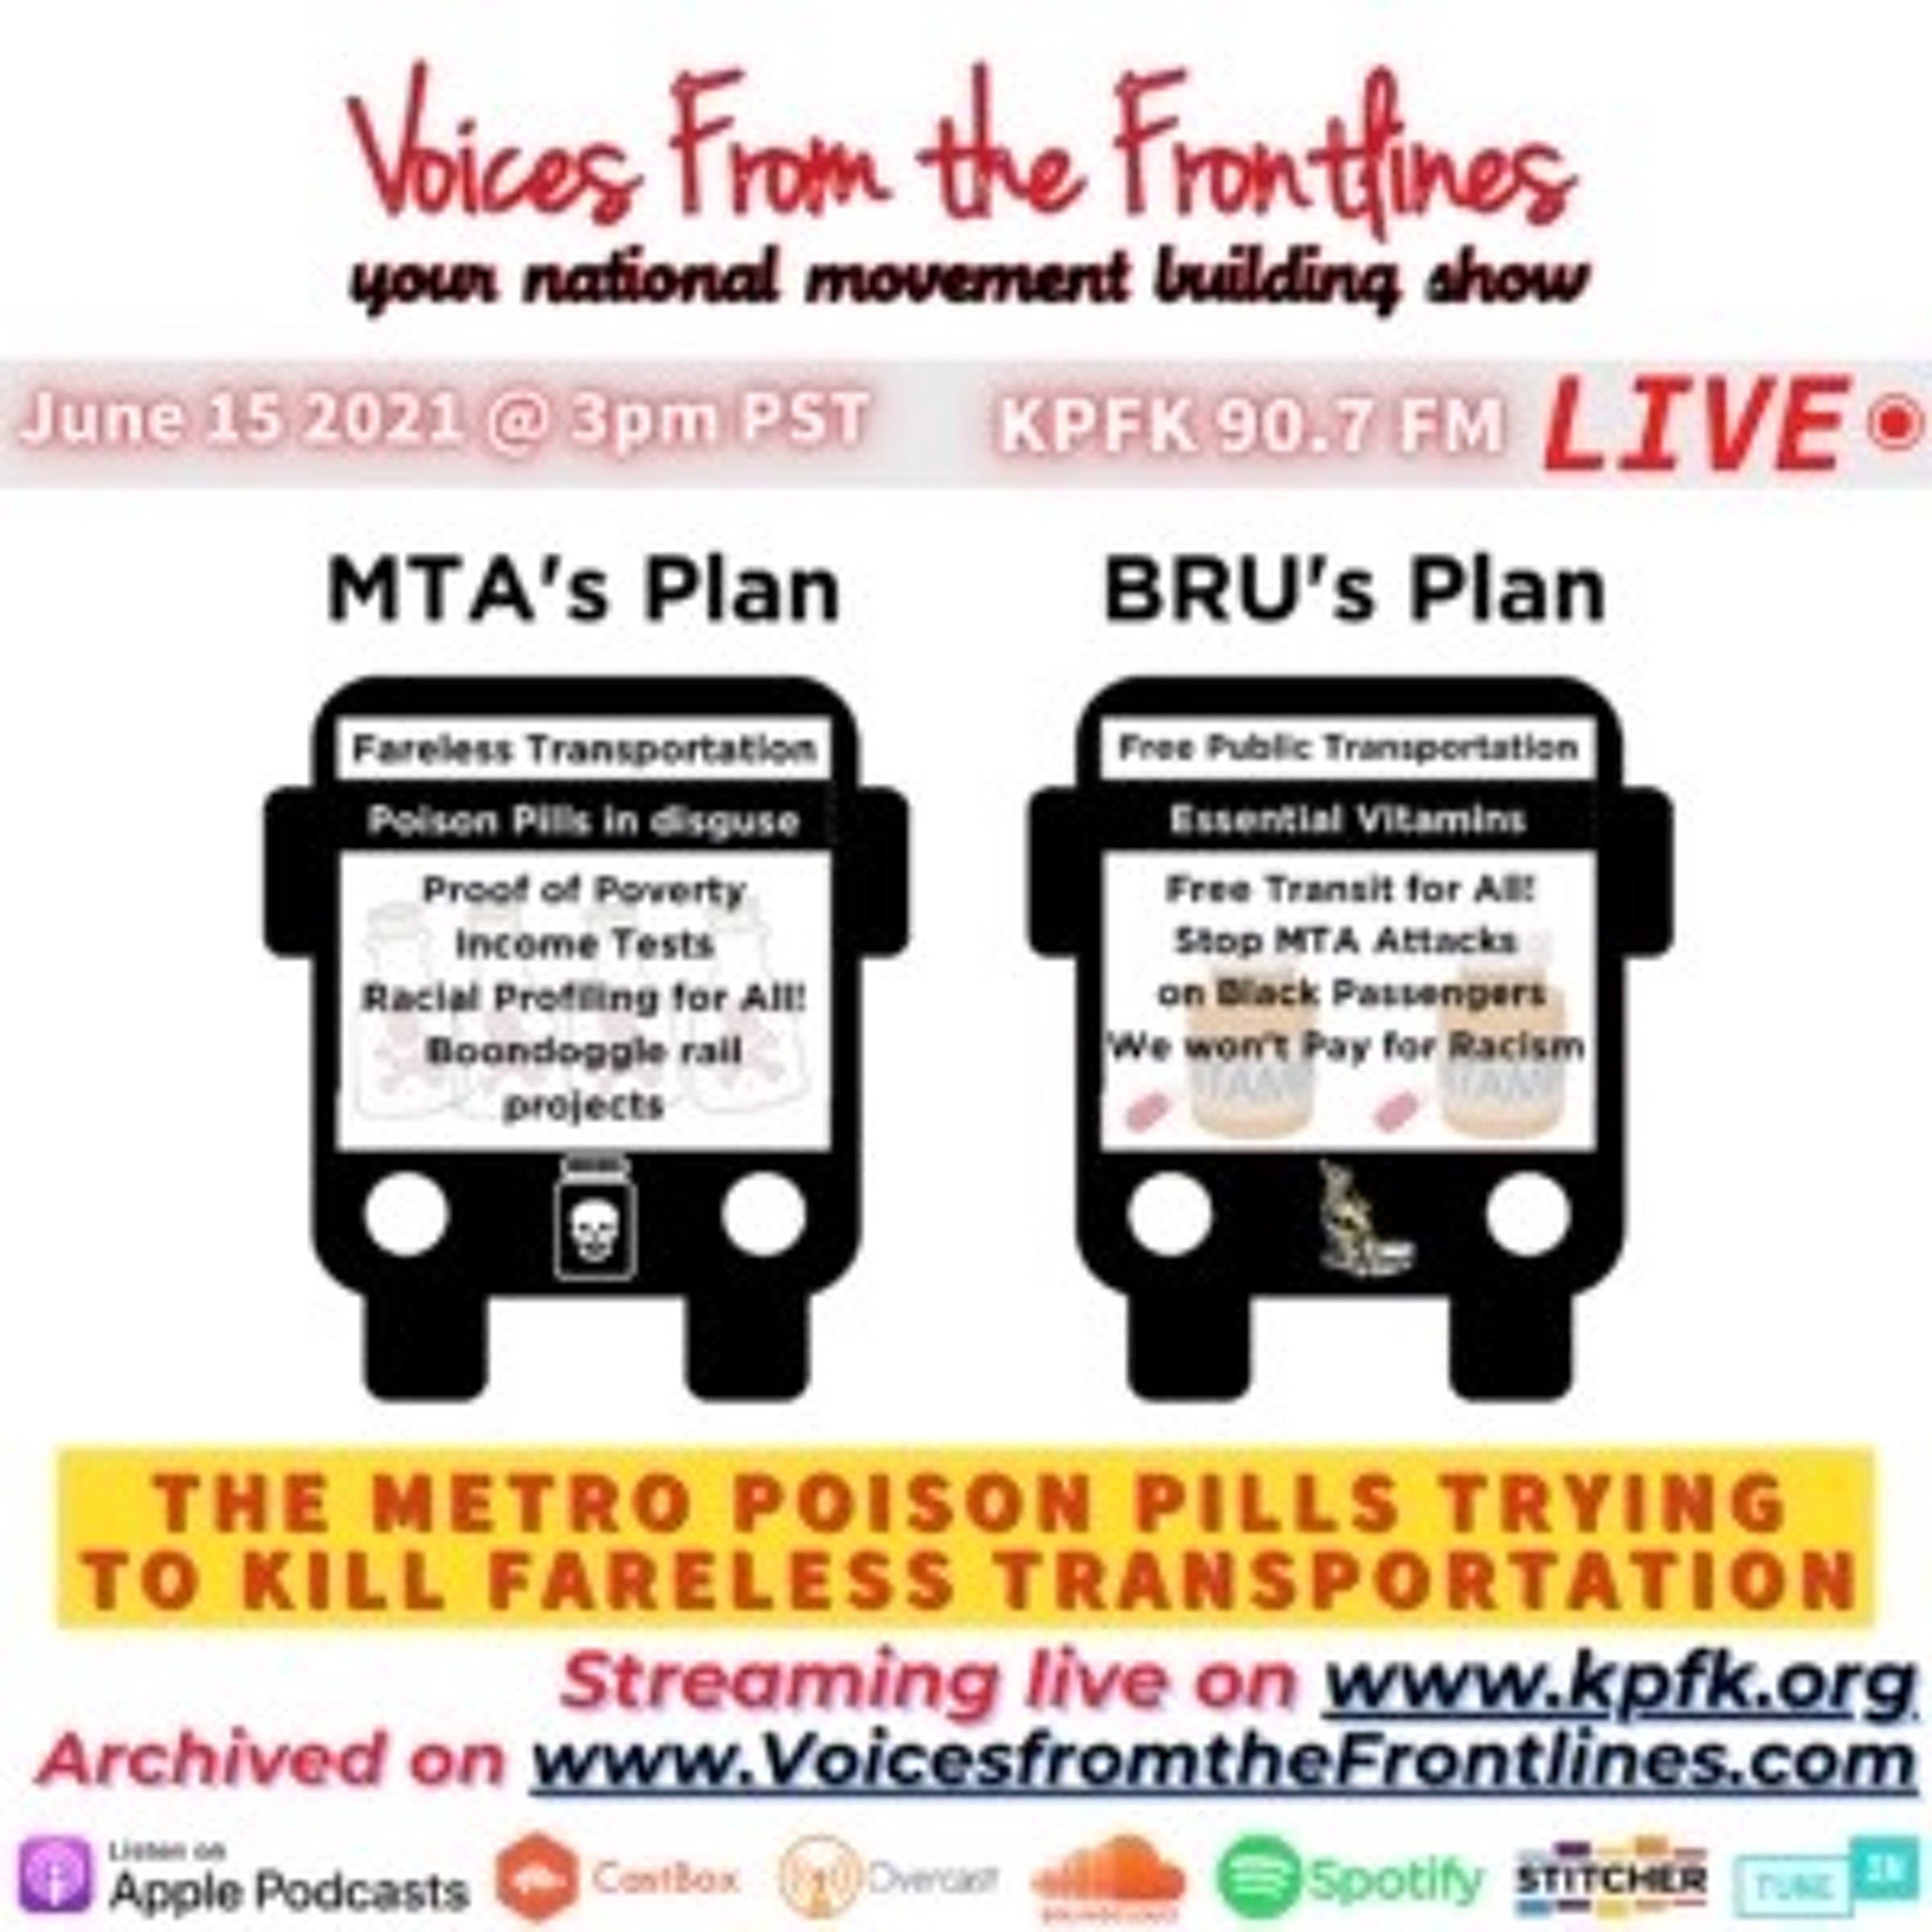 Voices Radio: BUS RIDERS UNION tackles MTA’s Poison Pill Initiative with Fareless Transportation